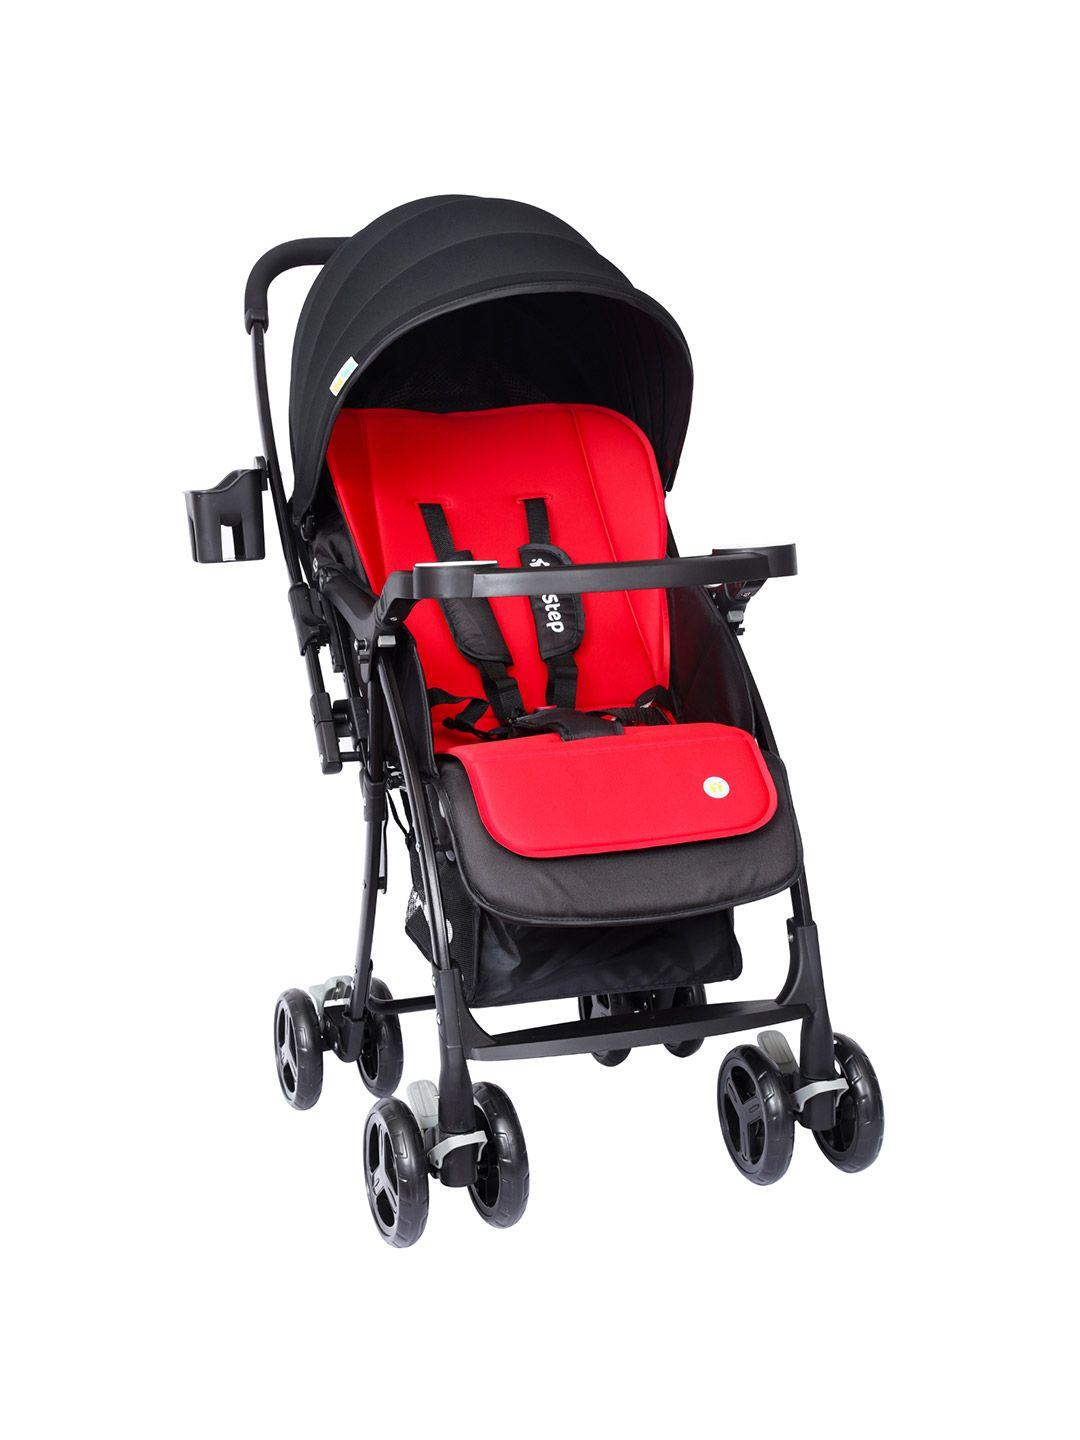 1st step kids red & black baby stroller with 5 point safety harness & reversible handlebar